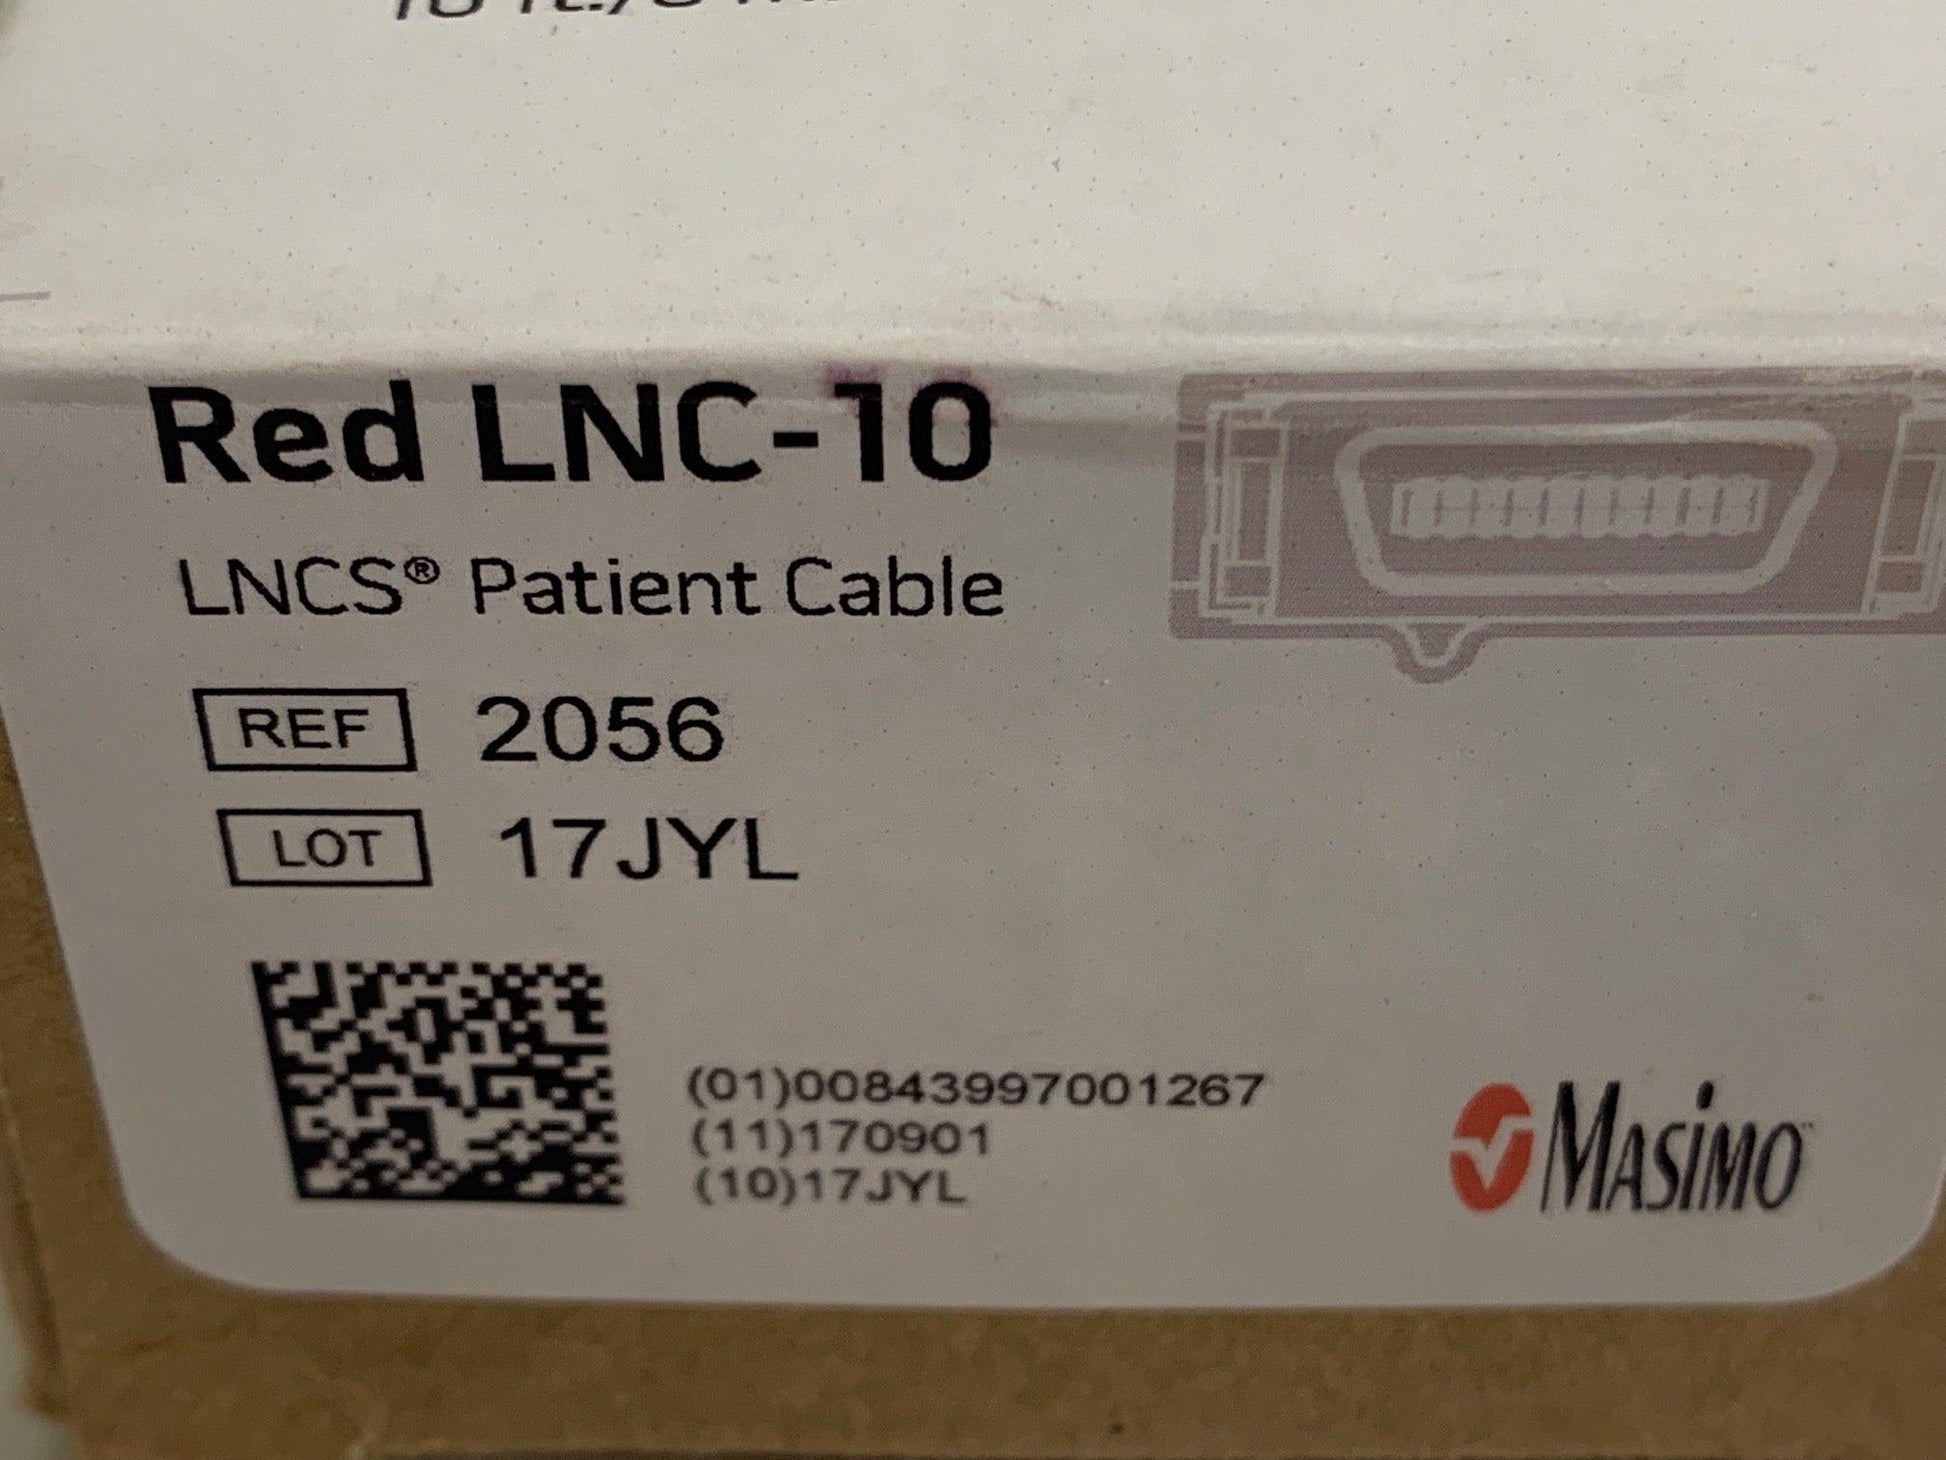 NEW Masimo OEM Red LNC-10 LNCS Direct Connect SpO2 Patient Cable 2056 - MBR Medicals